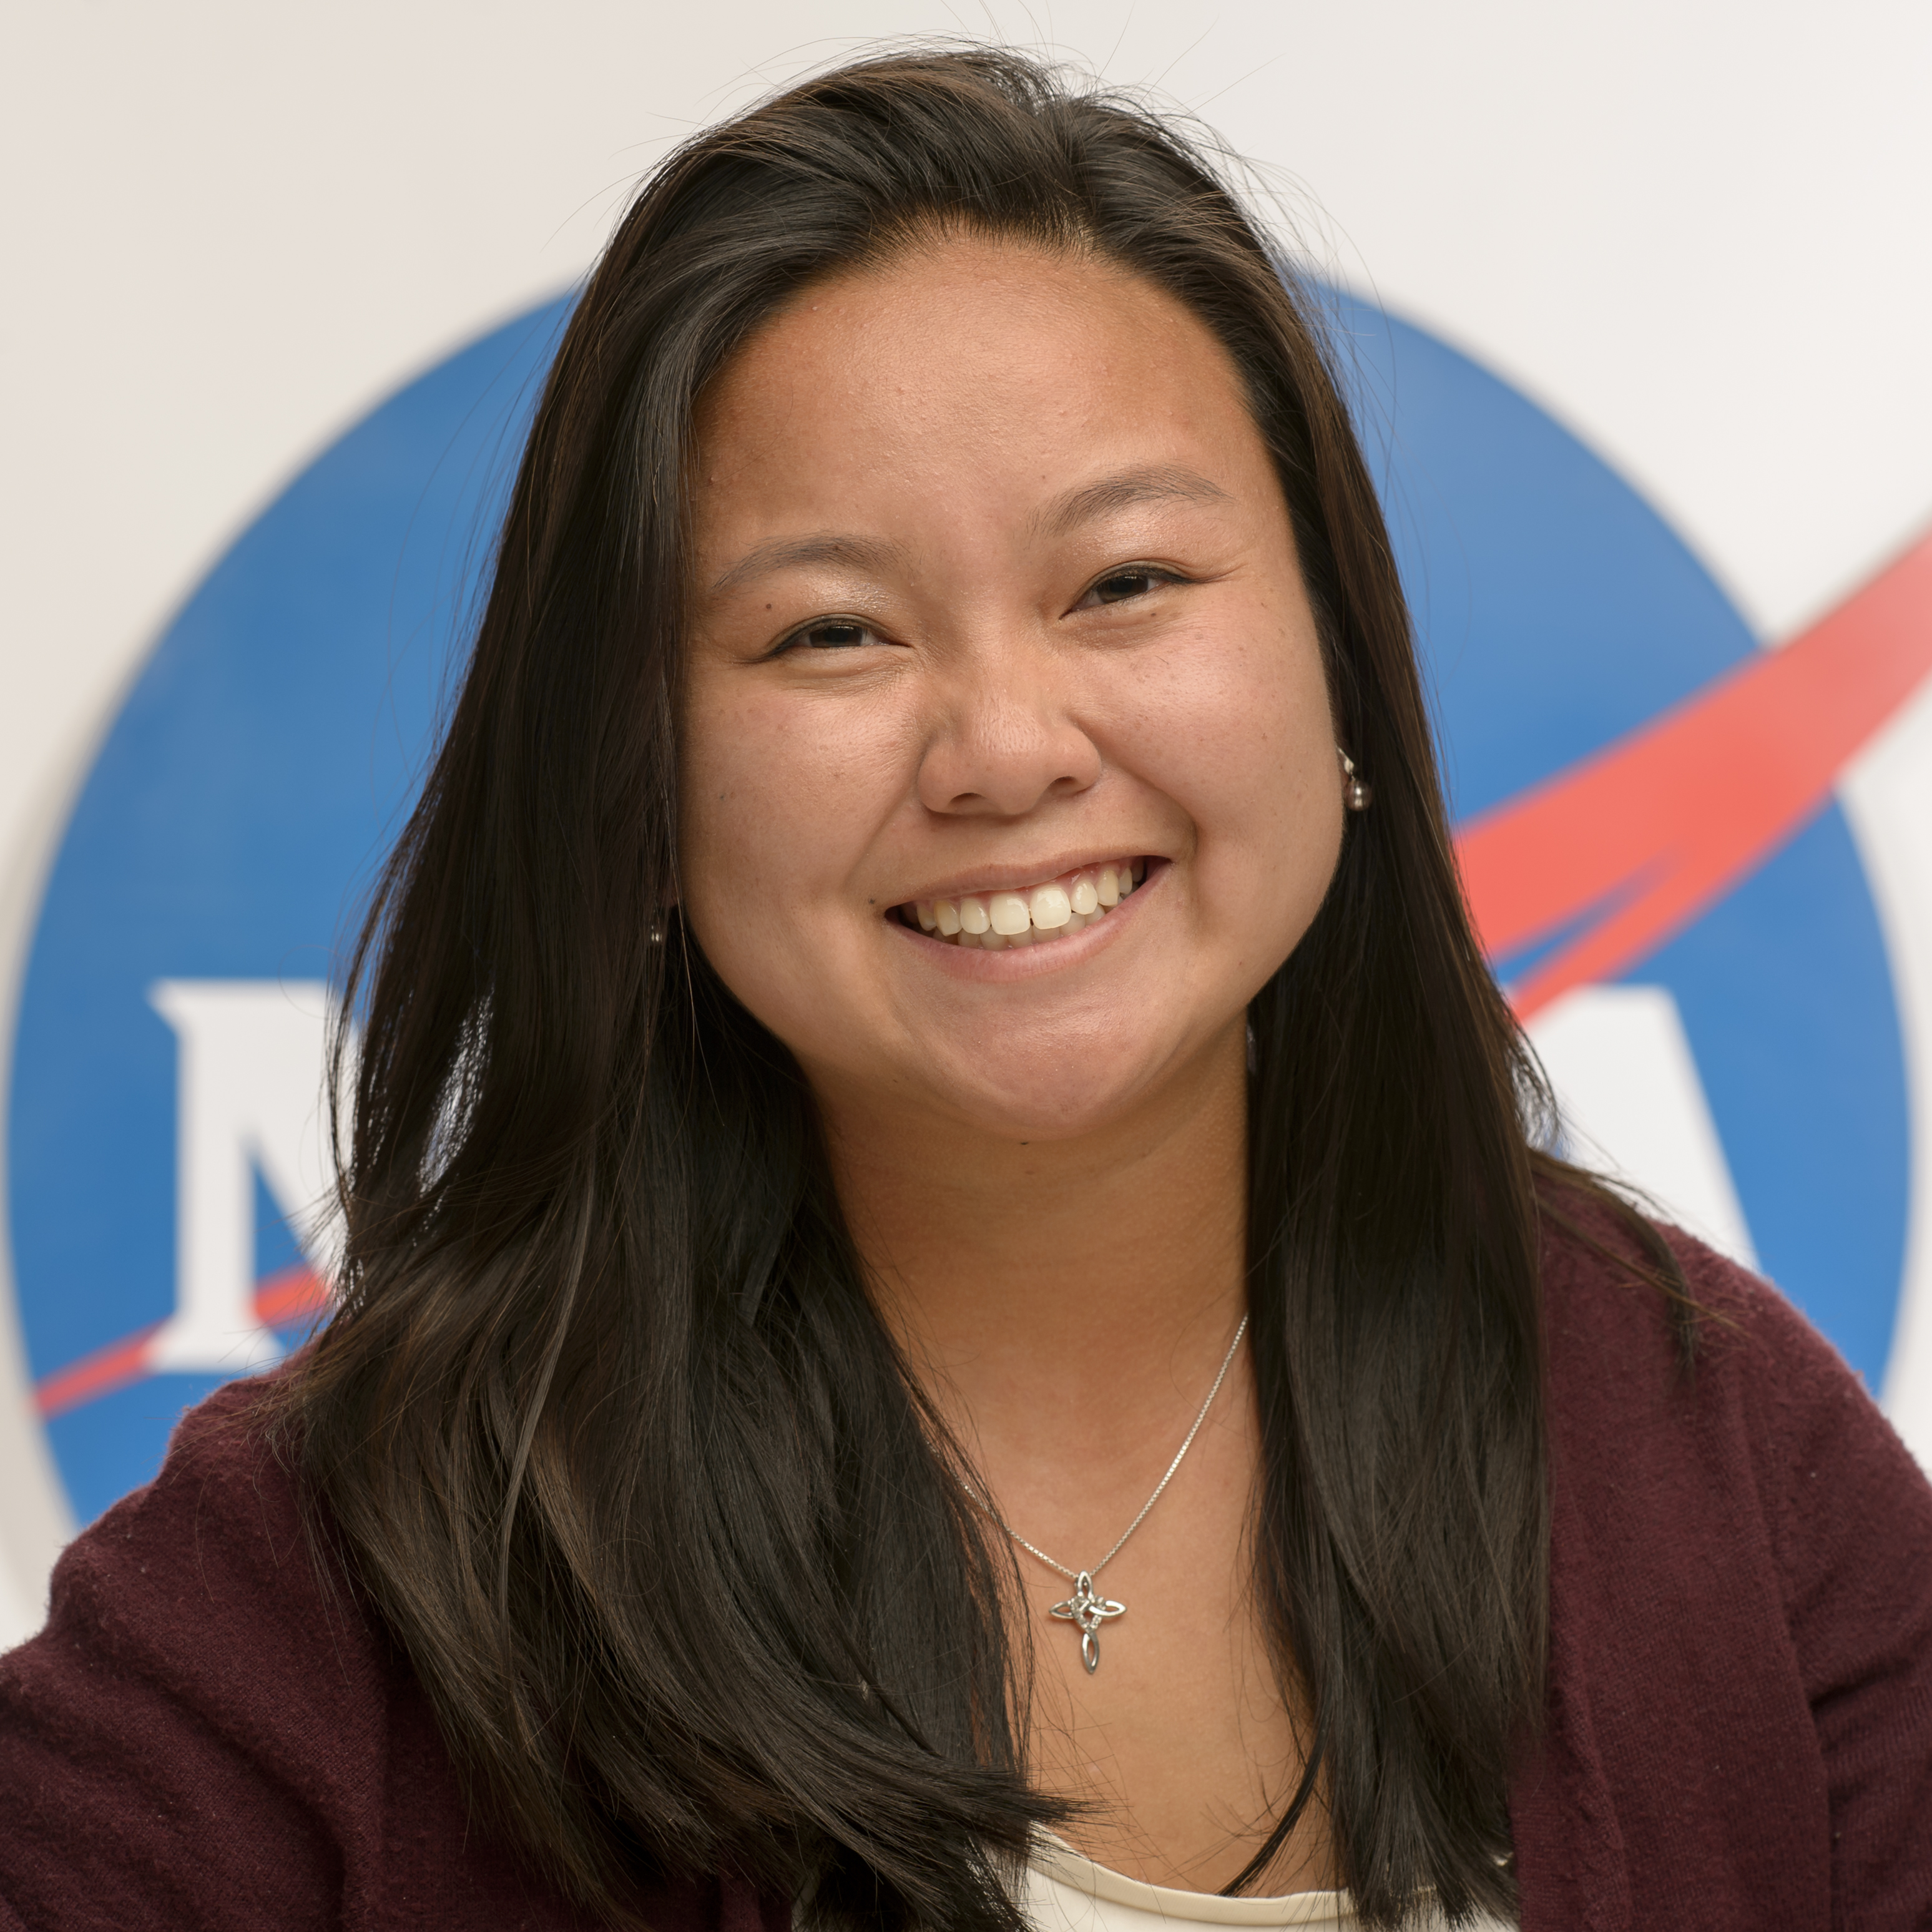 "At an early age, I was exposed to all things NASA." An interview with Christina Lim.